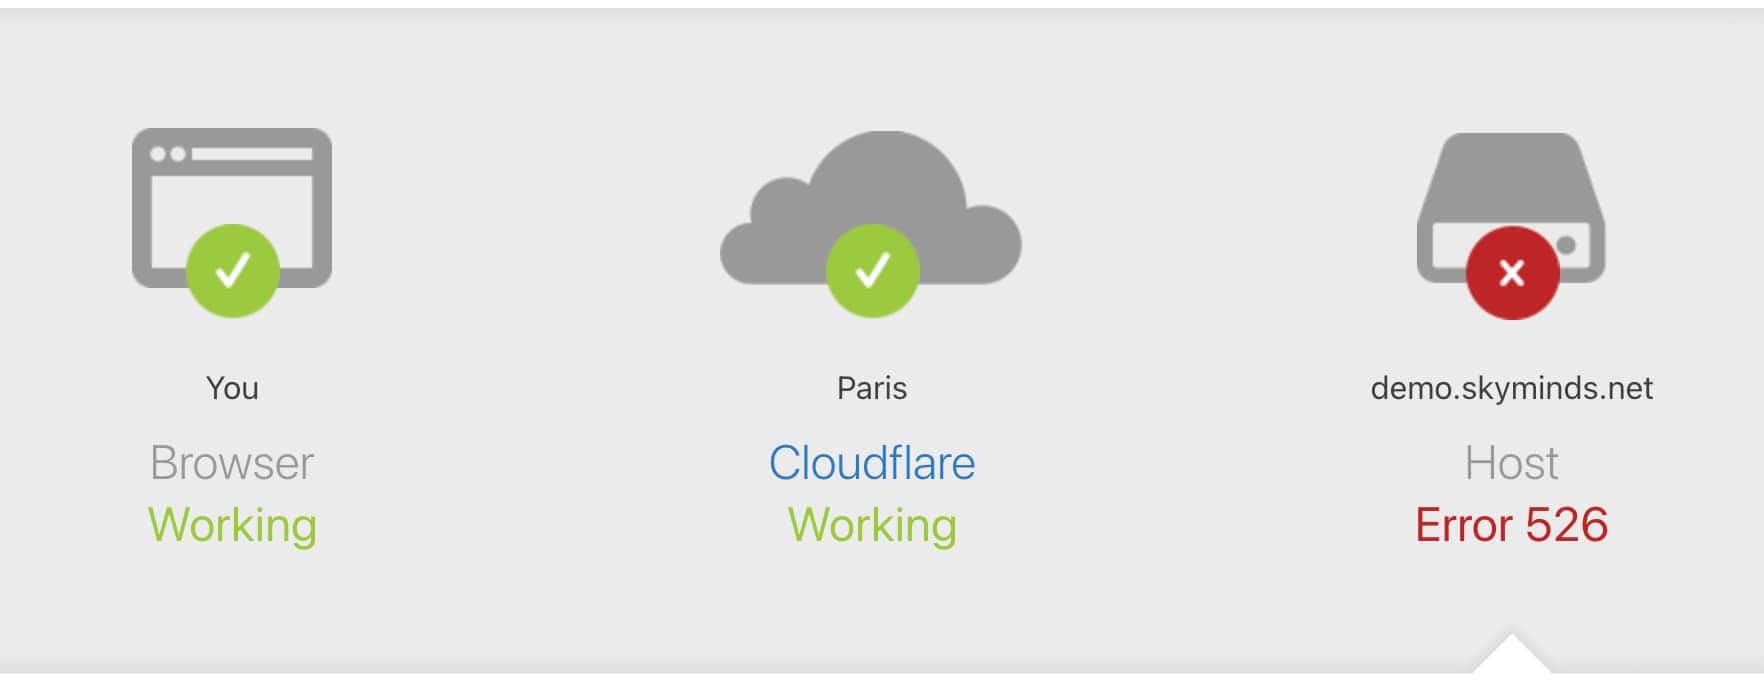 Resolve error 526 with Cloudflare and NginX.